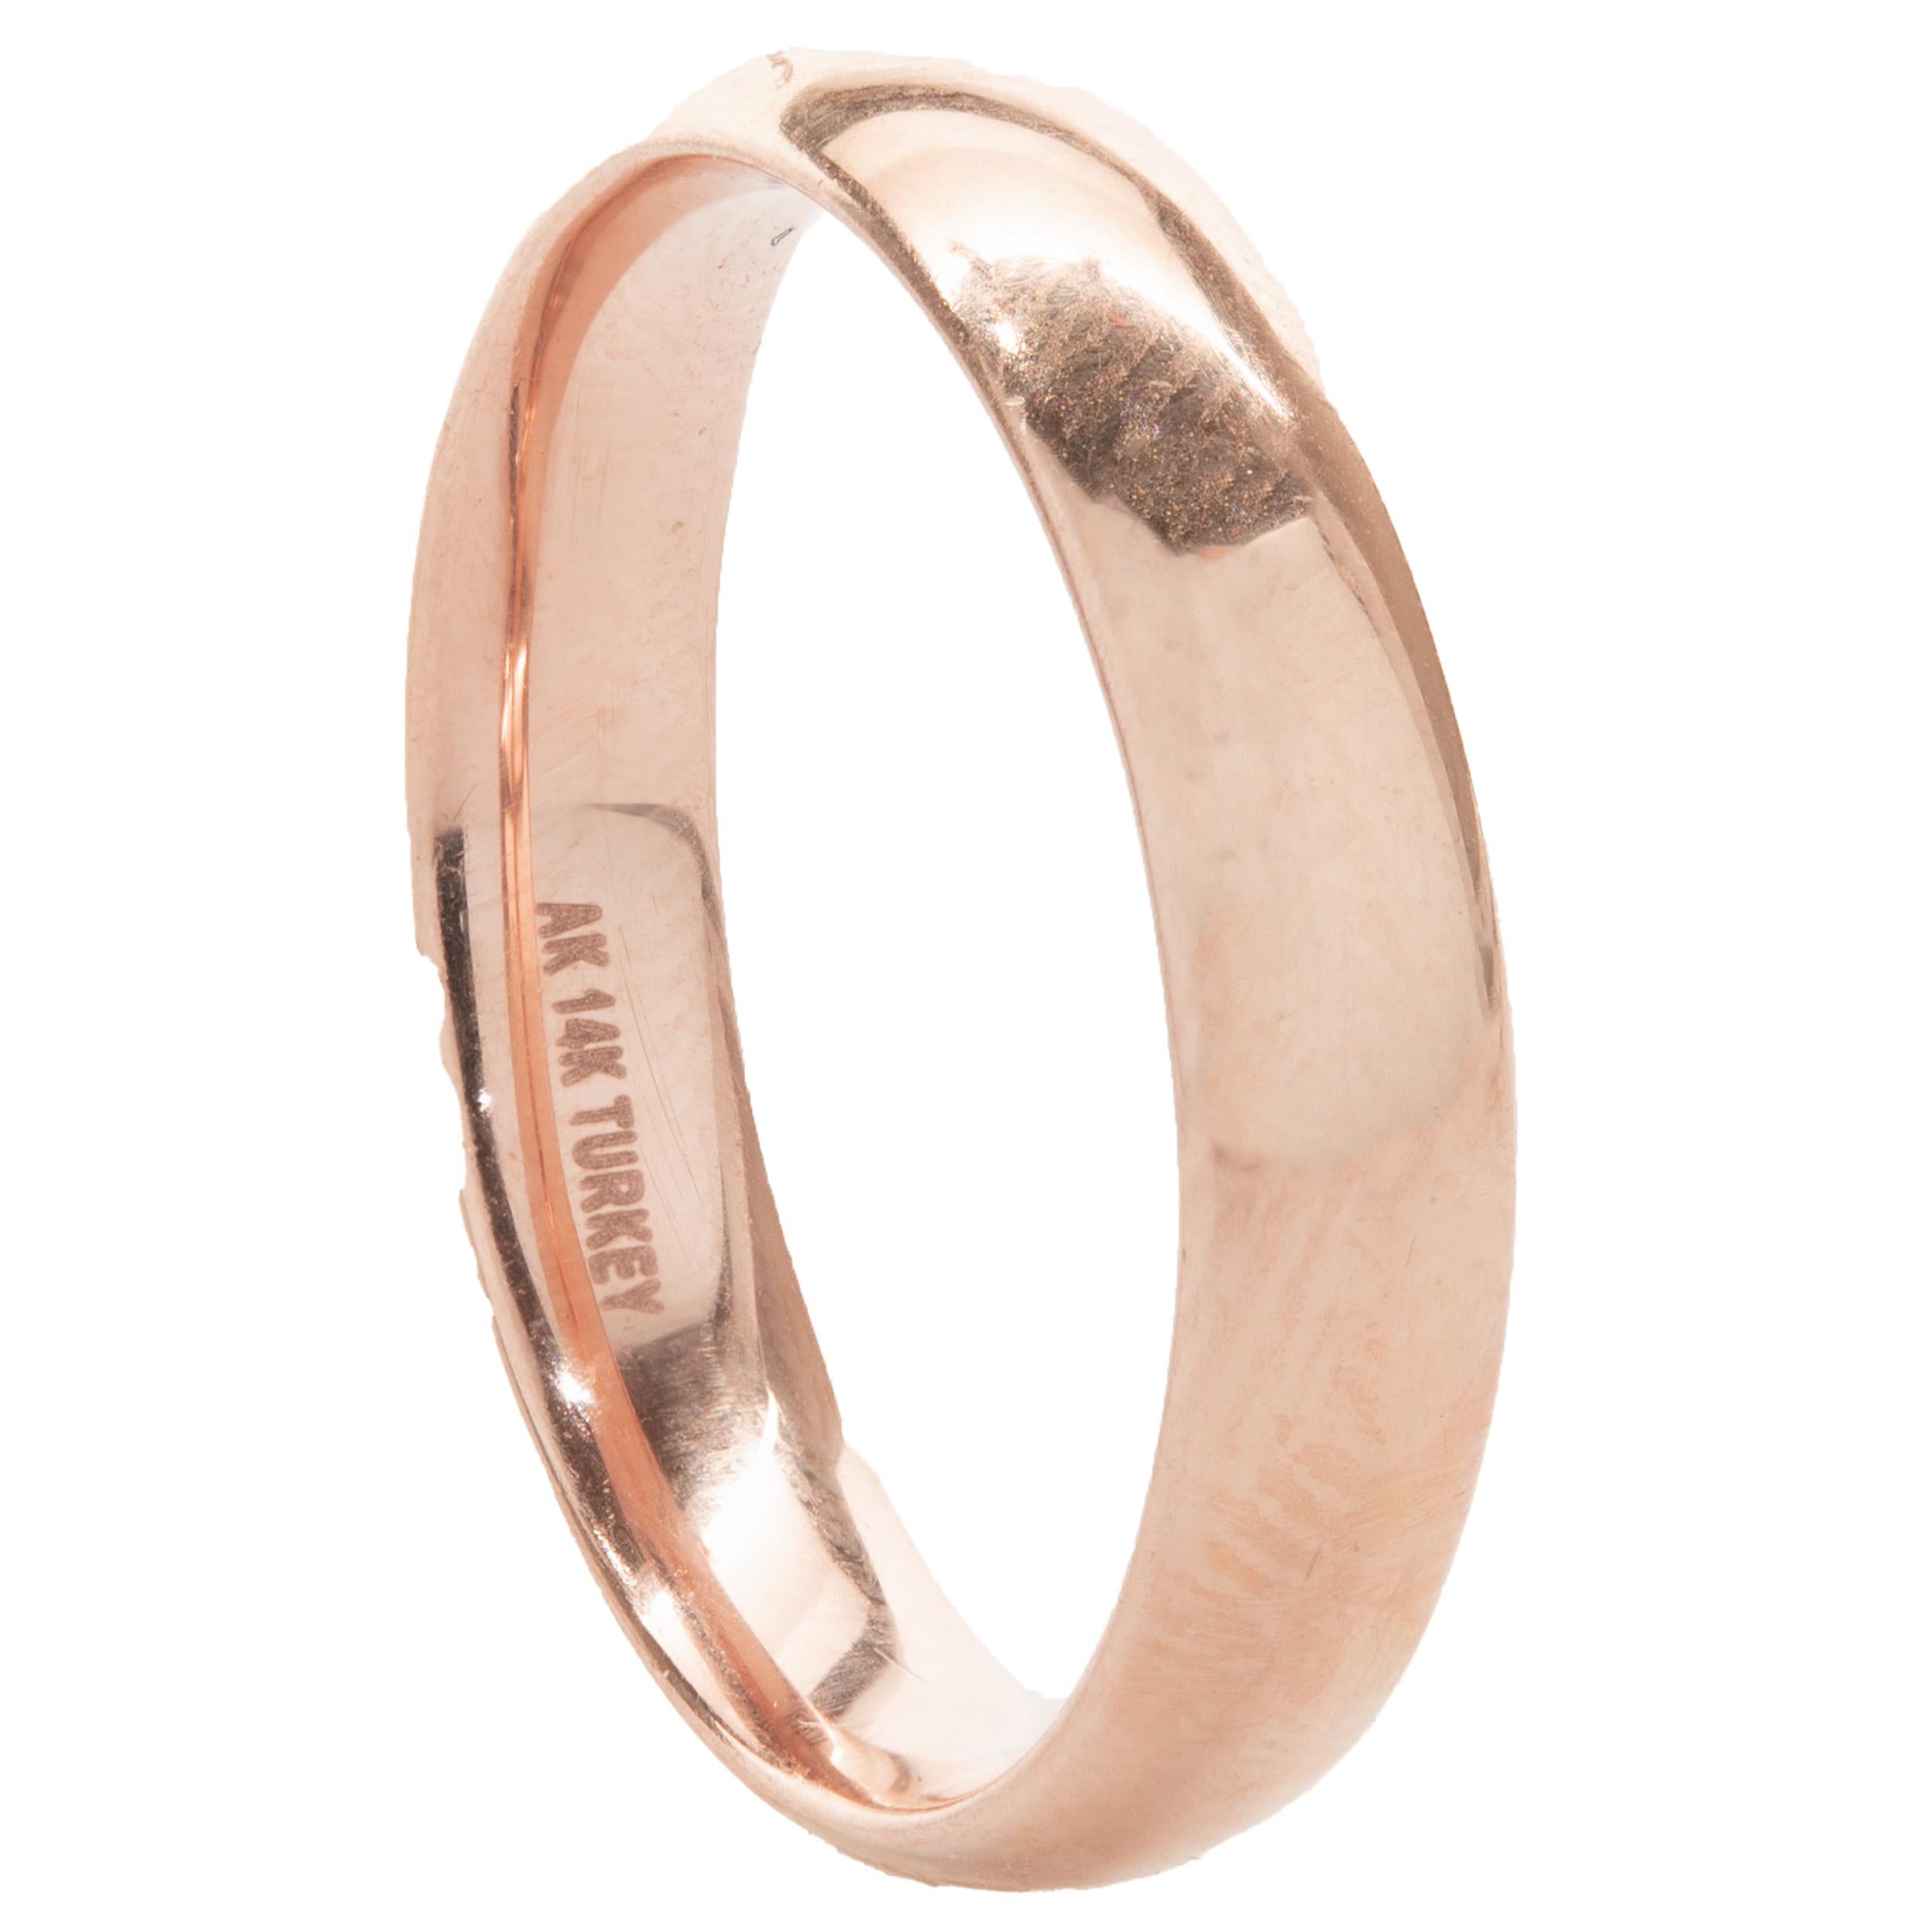 Designer: custom
Material: 14K rose gold
Dimensions: the ring measures 4mm wide
Weight:  1.37 grams
Ring Size: 8 (Please allow up to 2 additional business days for sizing requests) 